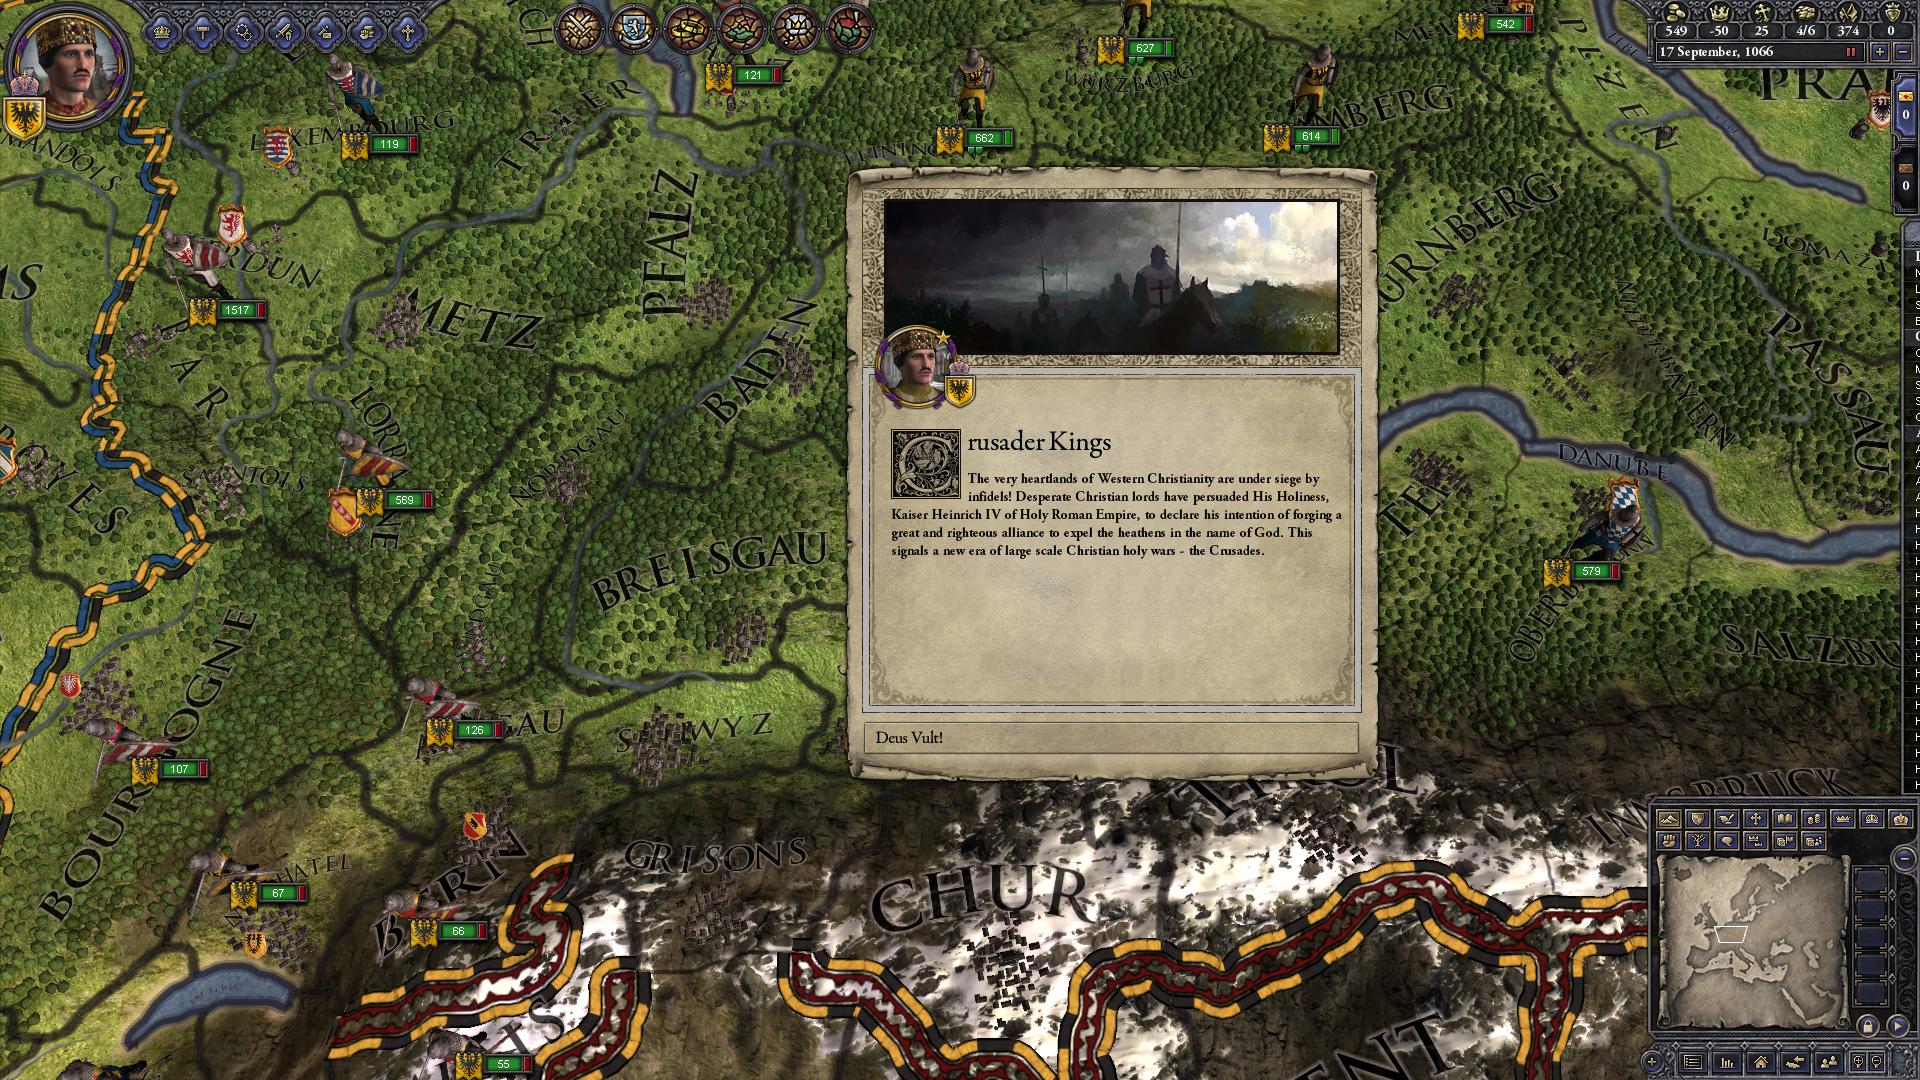 Expansion - Crusader Kings II: Sons of Abraham Featured Screenshot #1